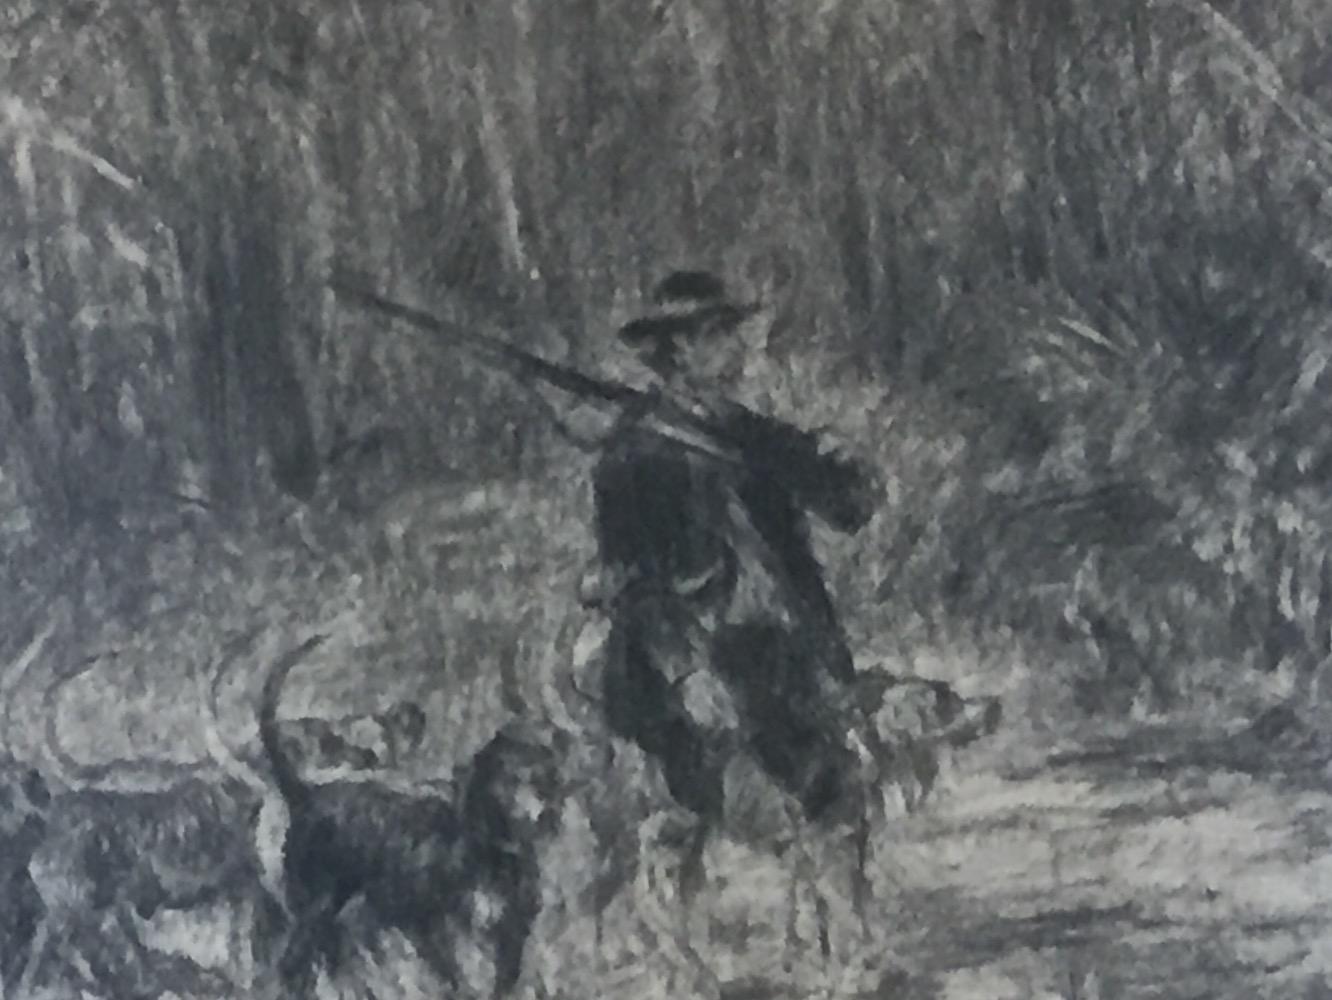 The hunter and his hounds